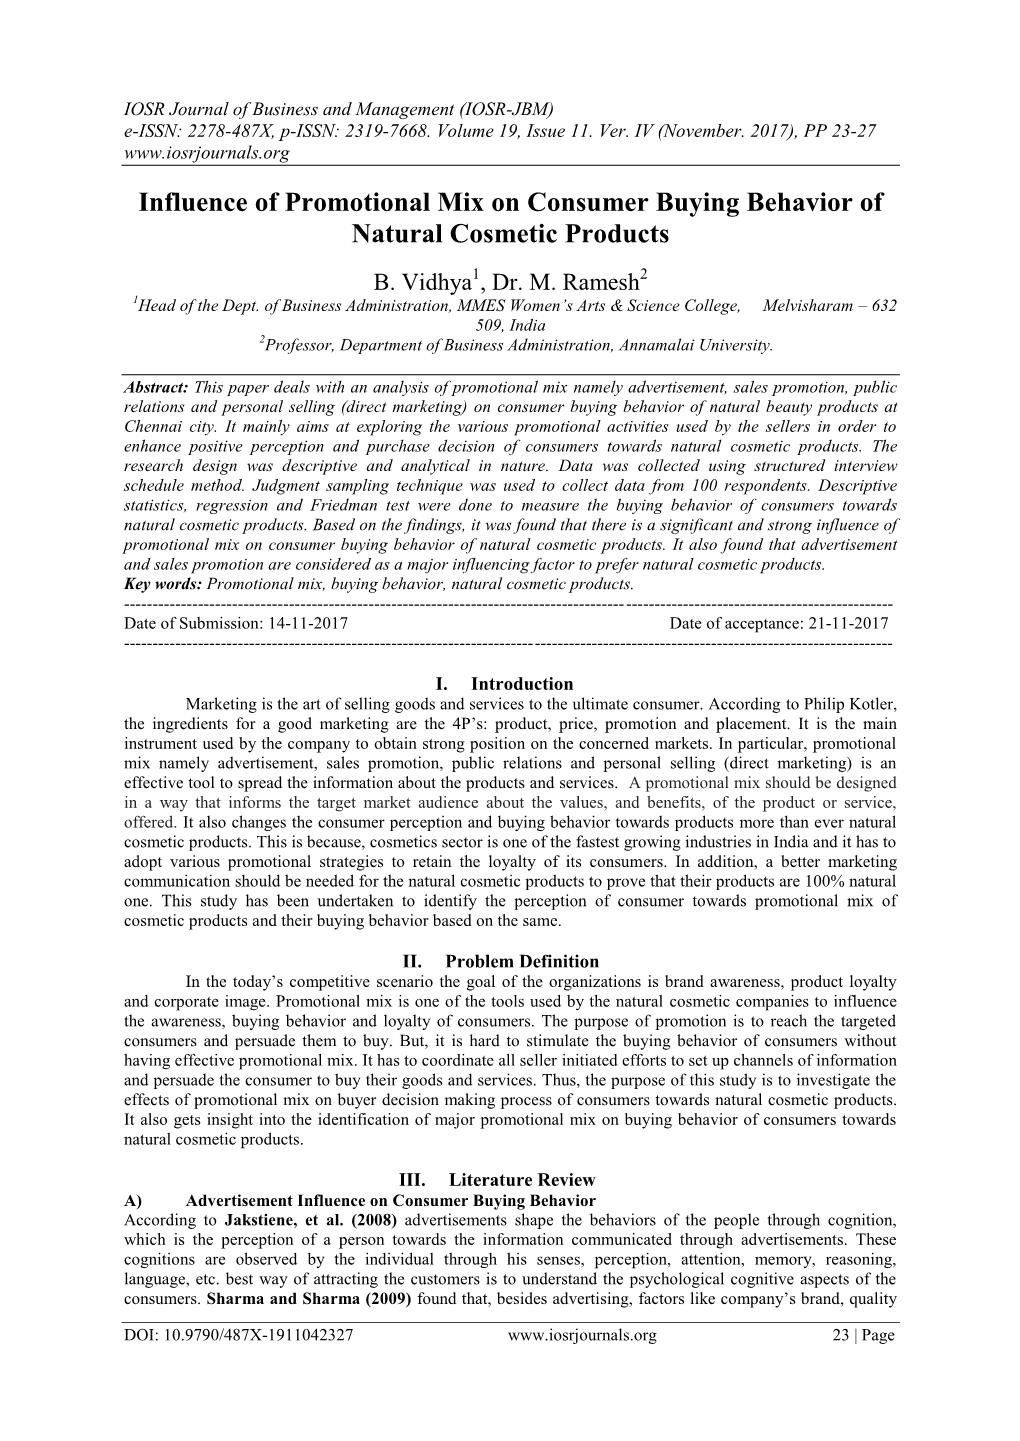 Influence of Promotional Mix on Consumer Buying Behavior of Natural Cosmetic Products